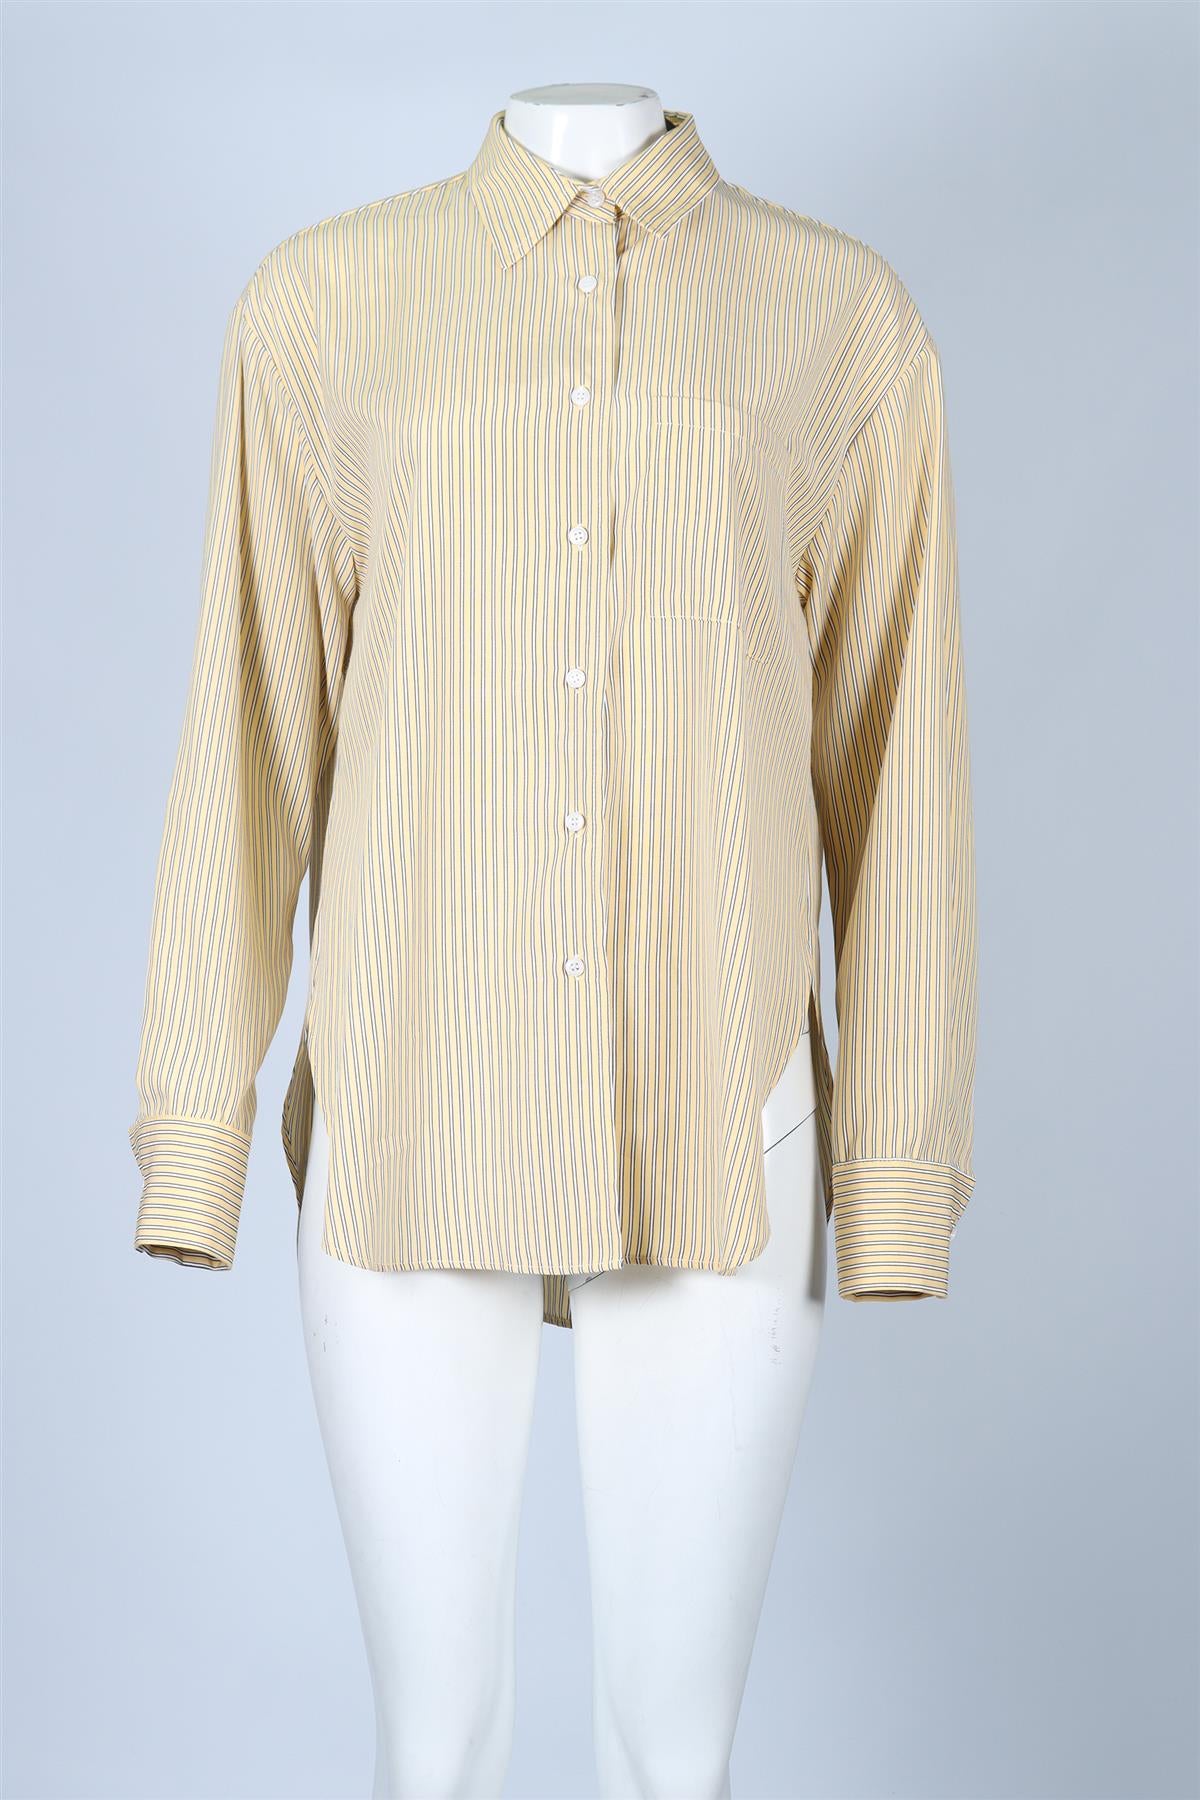 THE FRANKIE SHOP STRIPED COTTON SHIRT SMALL